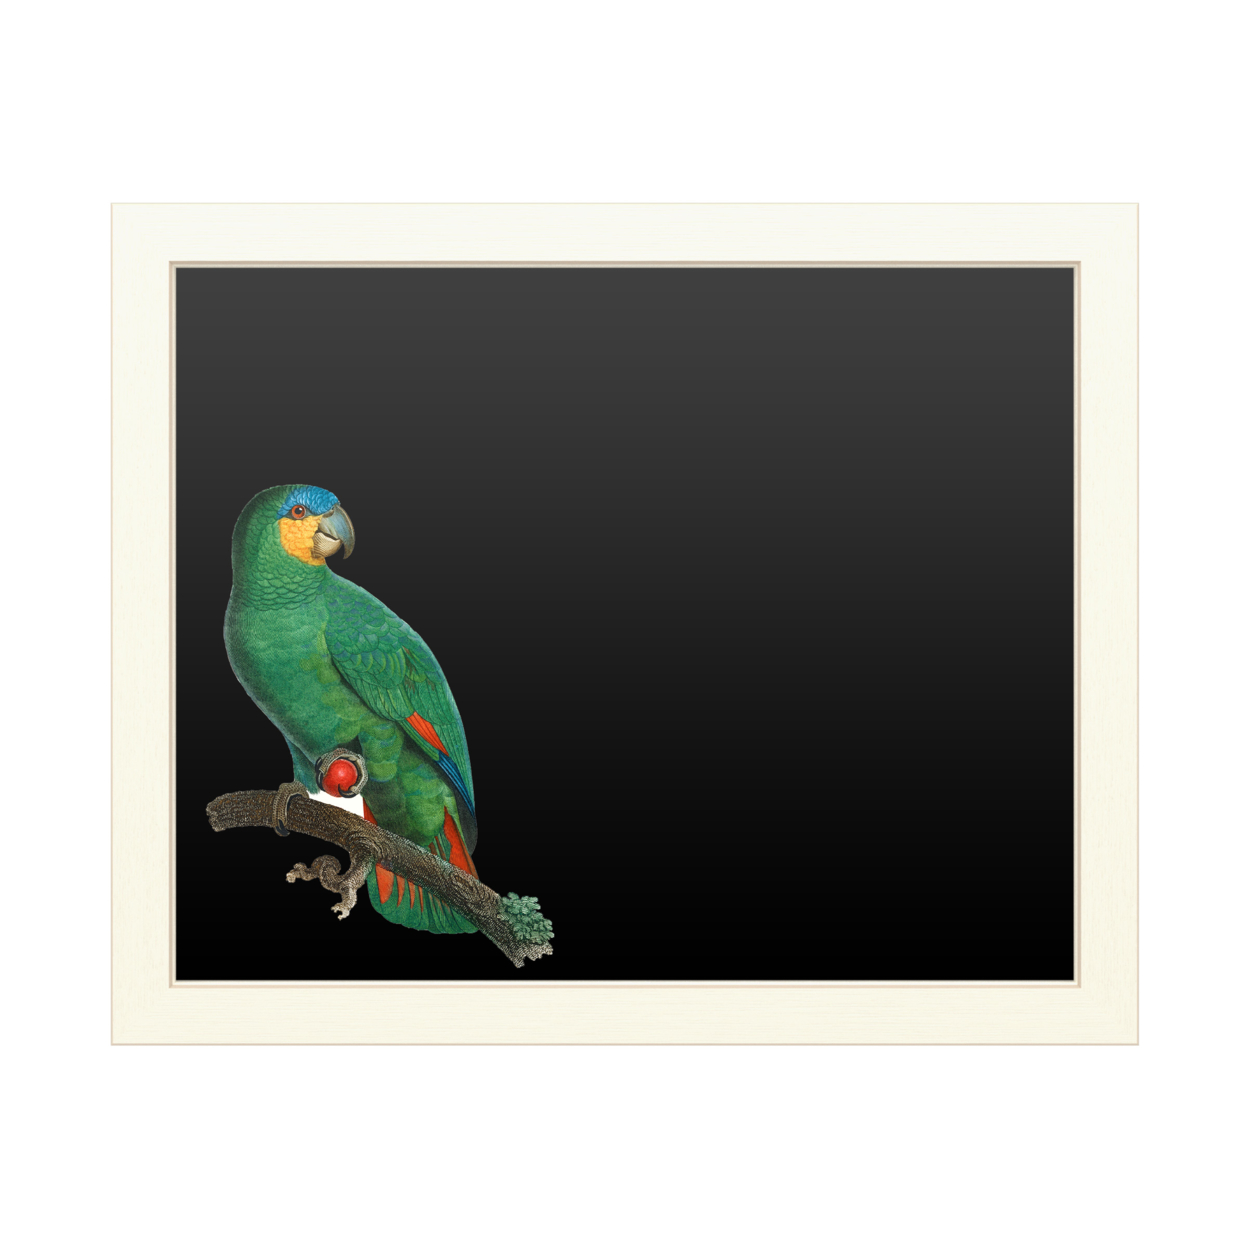 16 X 20 Chalk Board With Printed Artwork - Barraband Parrot Of The Tropics I White Board - Ready To Hang Chalkboard